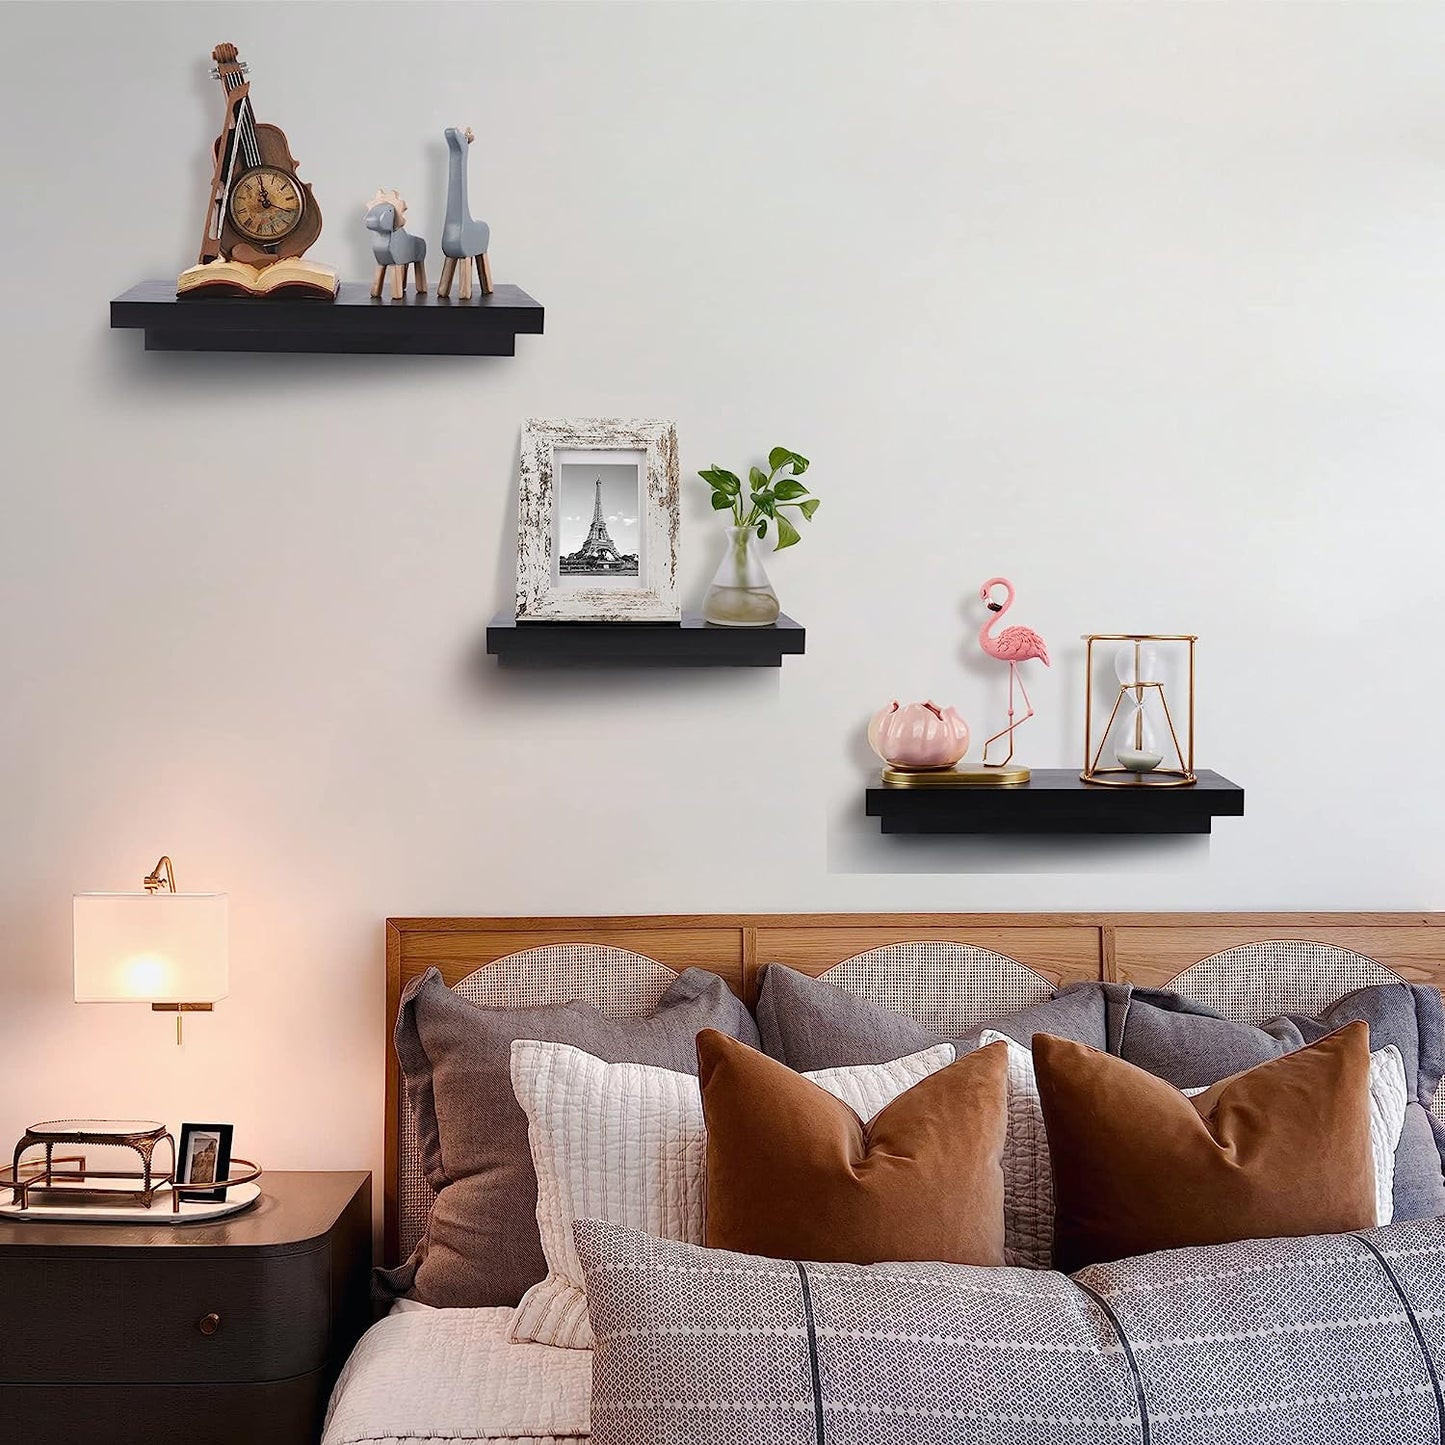 Wall Mounted Wood Shelves for Bedroom, Living Room, Bathroom, Kitchen, Small Picture Ledge Shelves